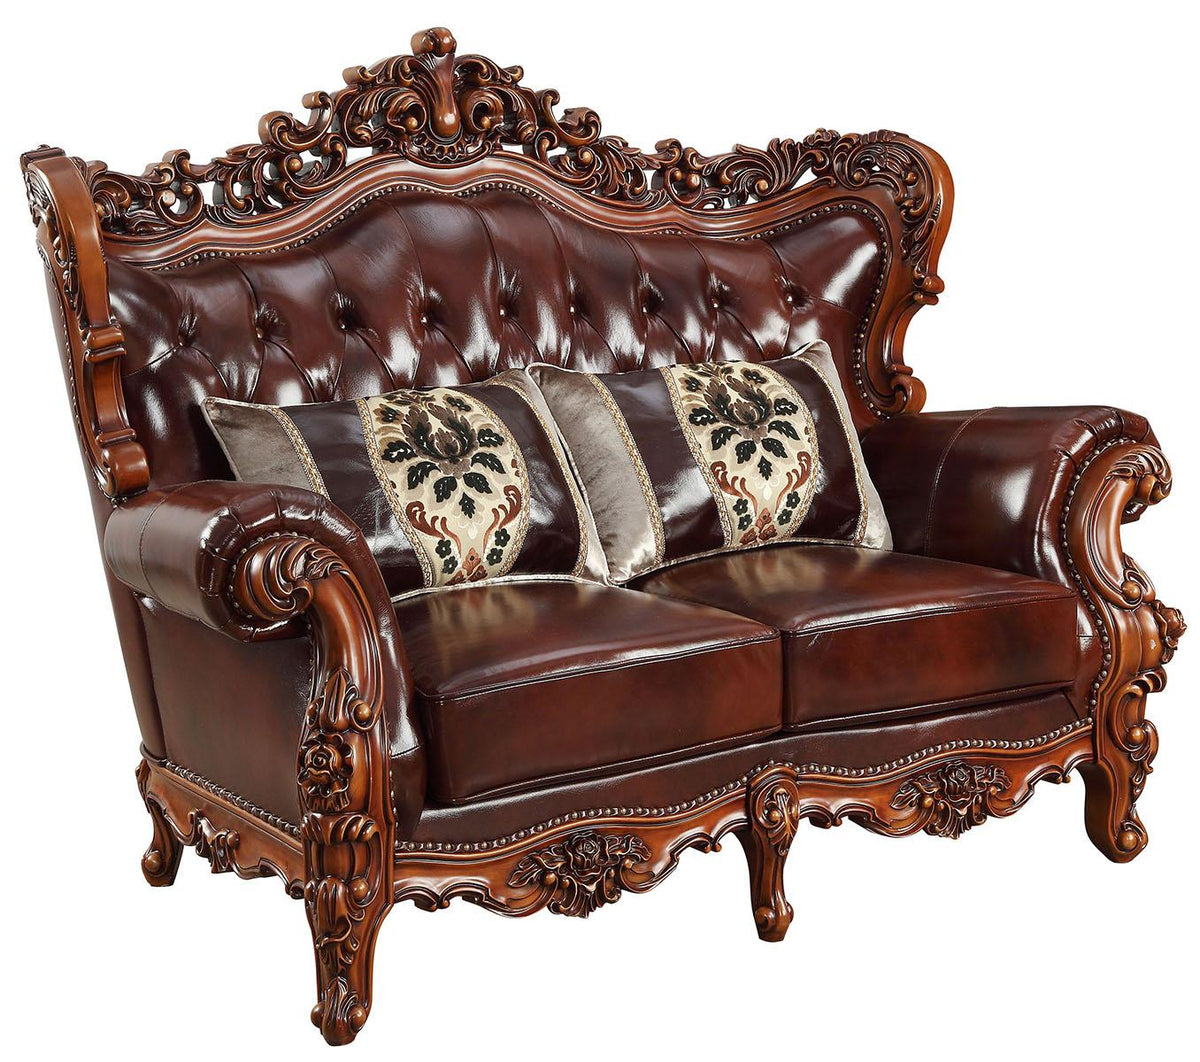 Acme Furniture Eustoma Loveseat in Cherry and Walnut 53066  Las Vegas Furniture Stores